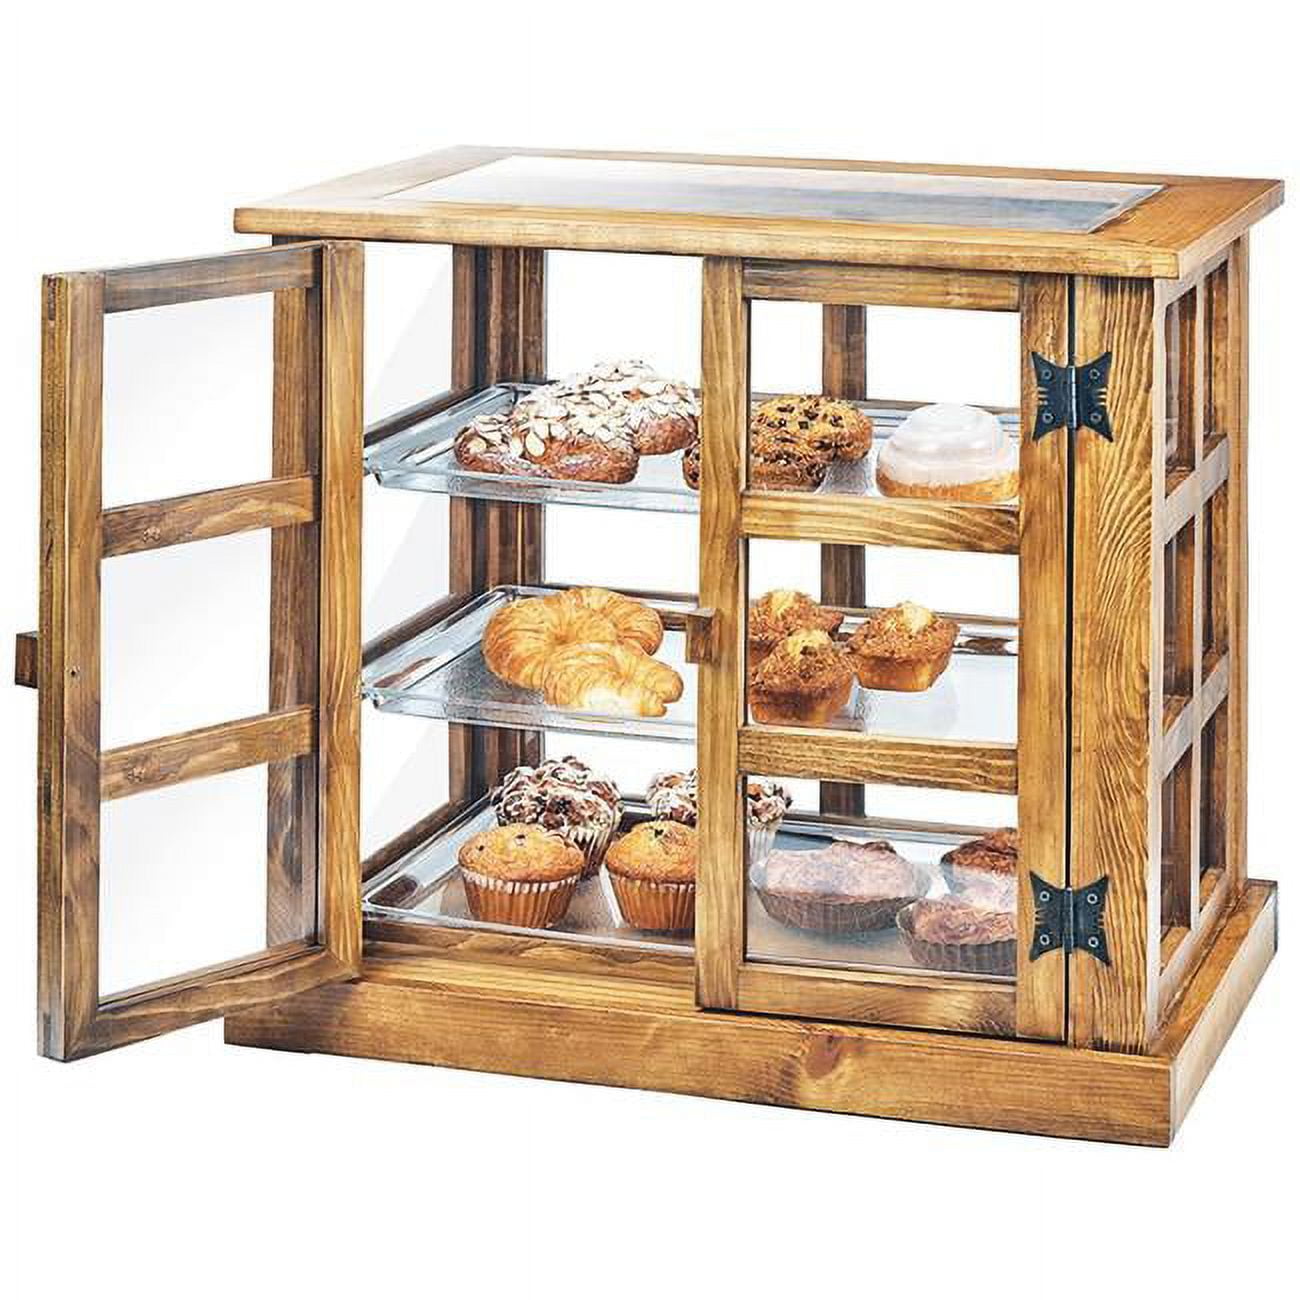 3621-99 Madera Reclaimed Wood 3 Tier Paneled Bakery Display Case - 17 X 25 X 23 In.